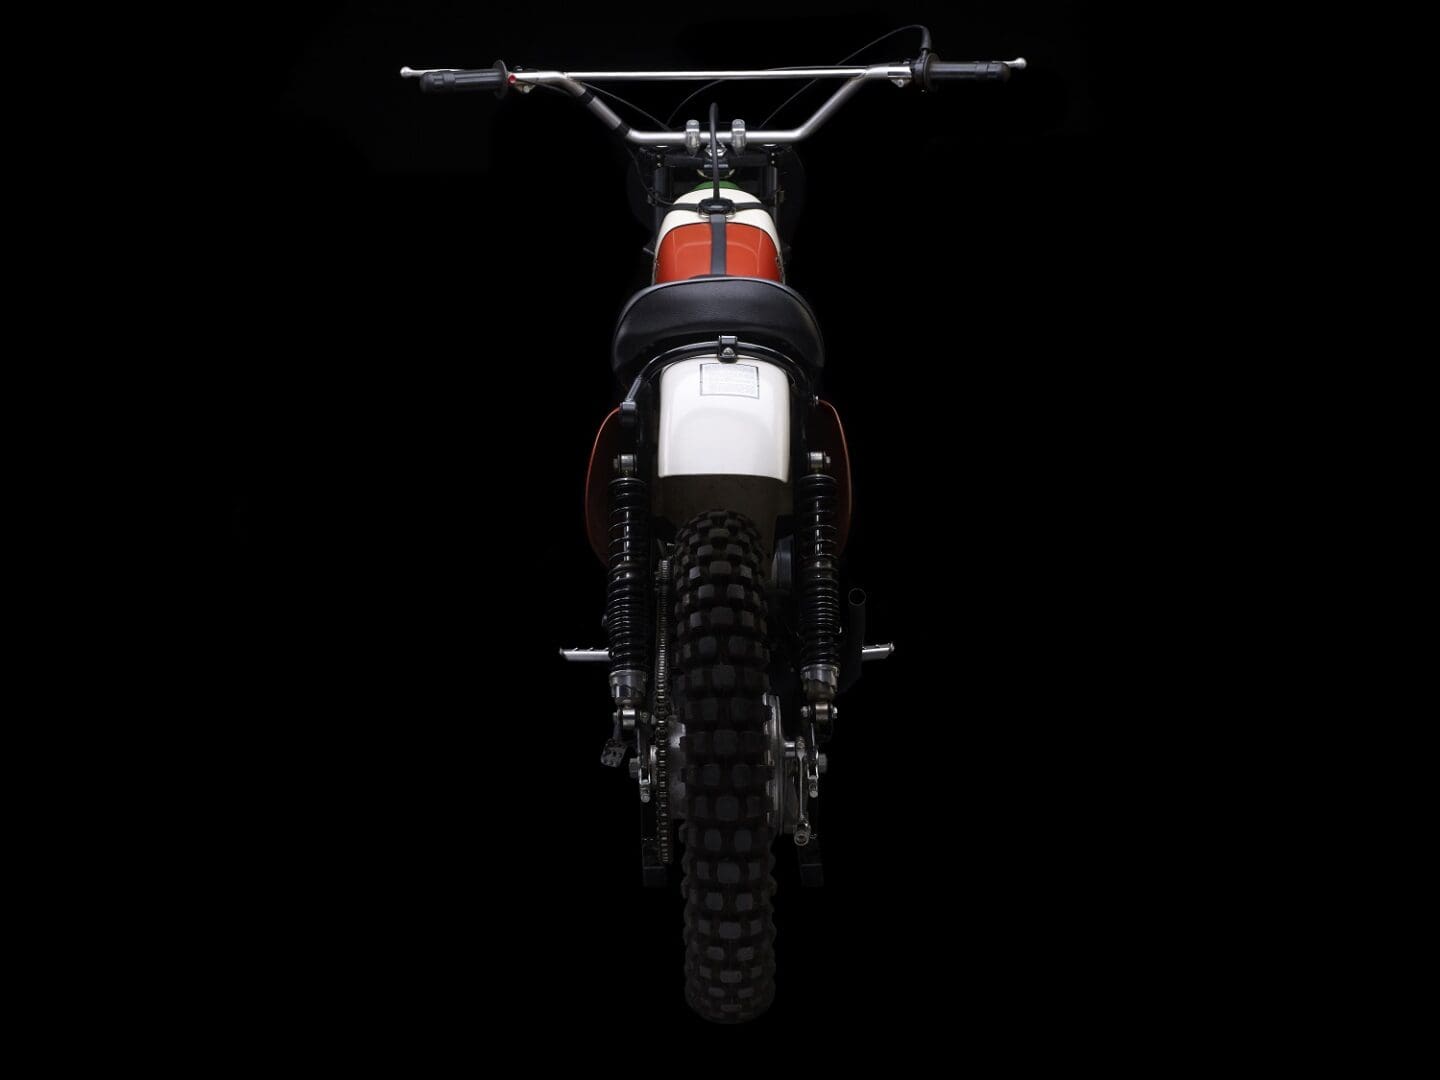 A dirt bike is shown against a black background.